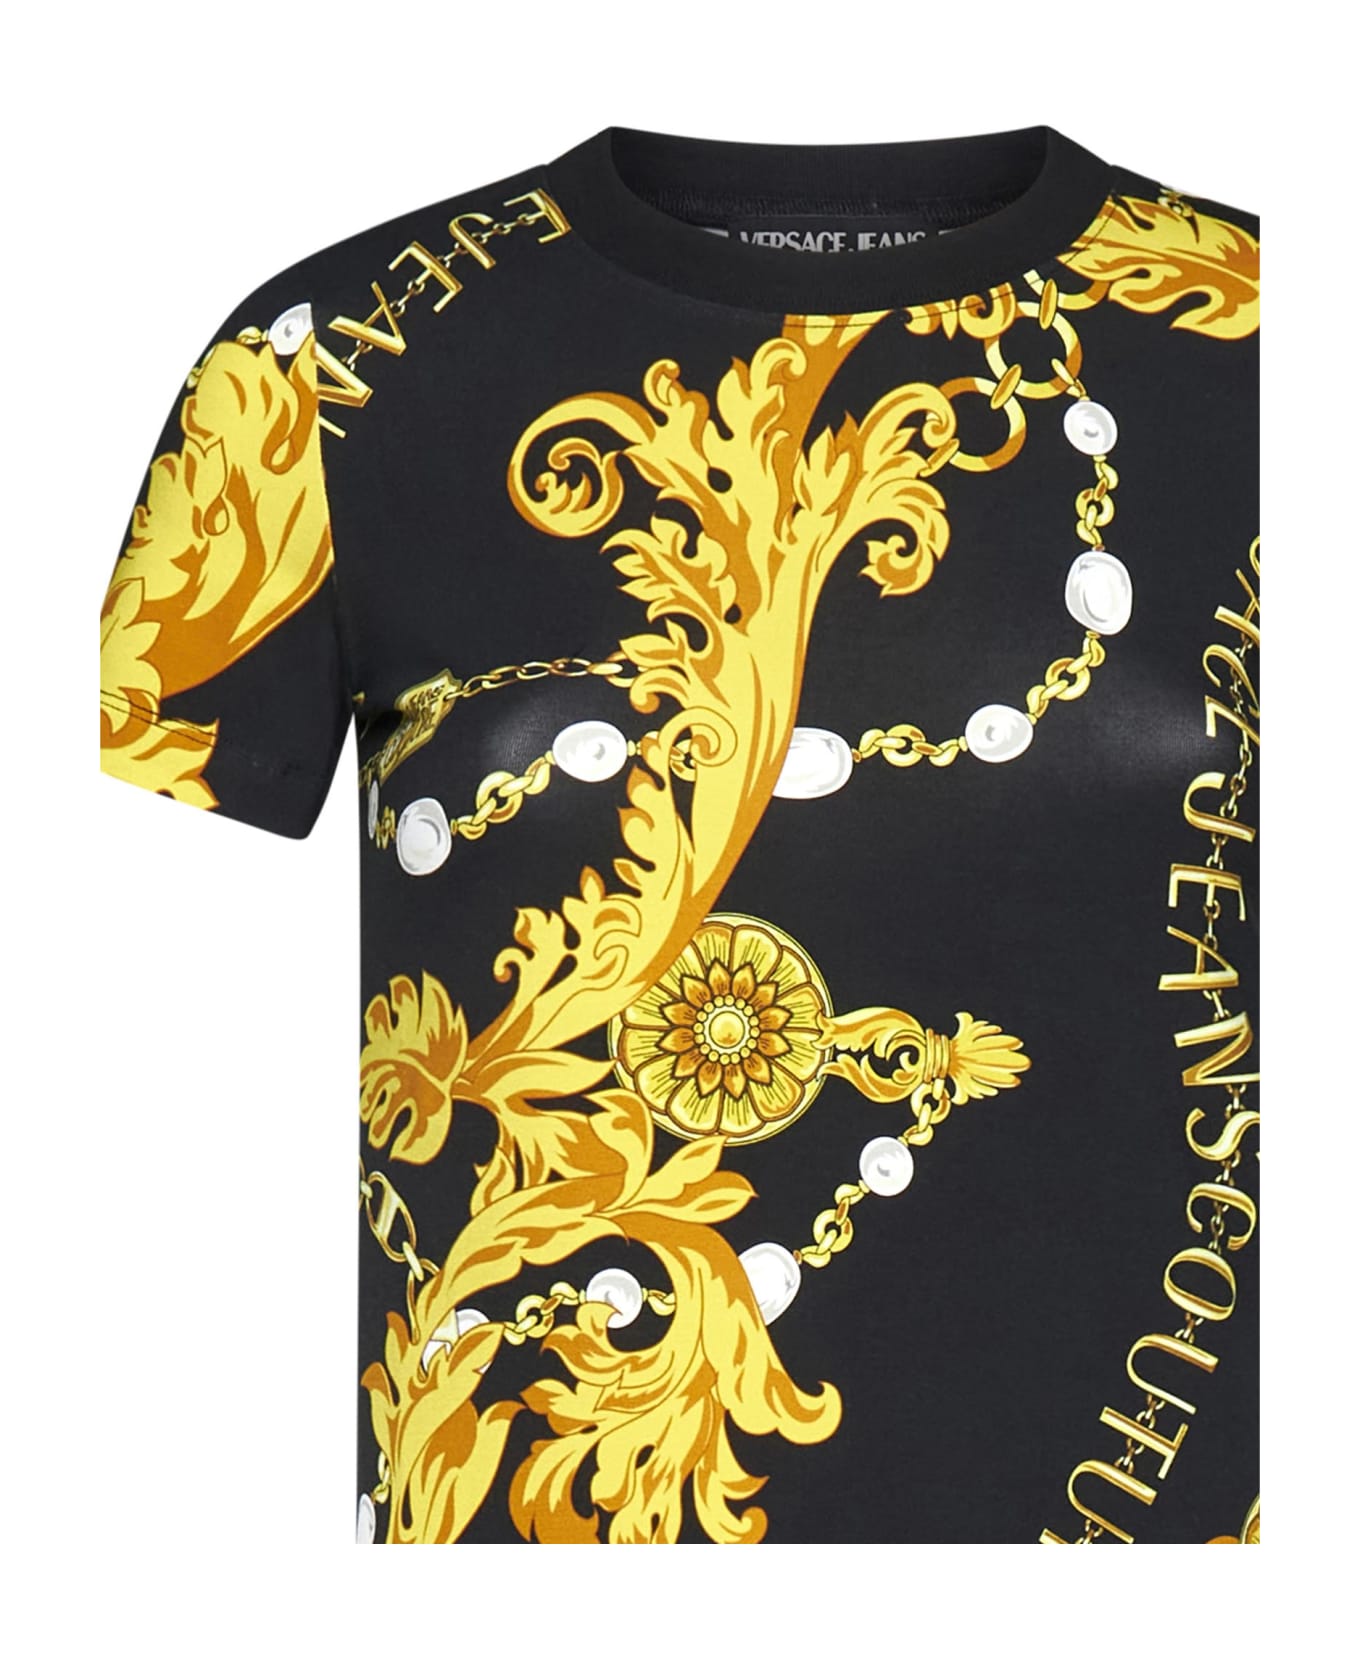 Versace Jeans Couture Chain Couture T-shirt - Black/gold